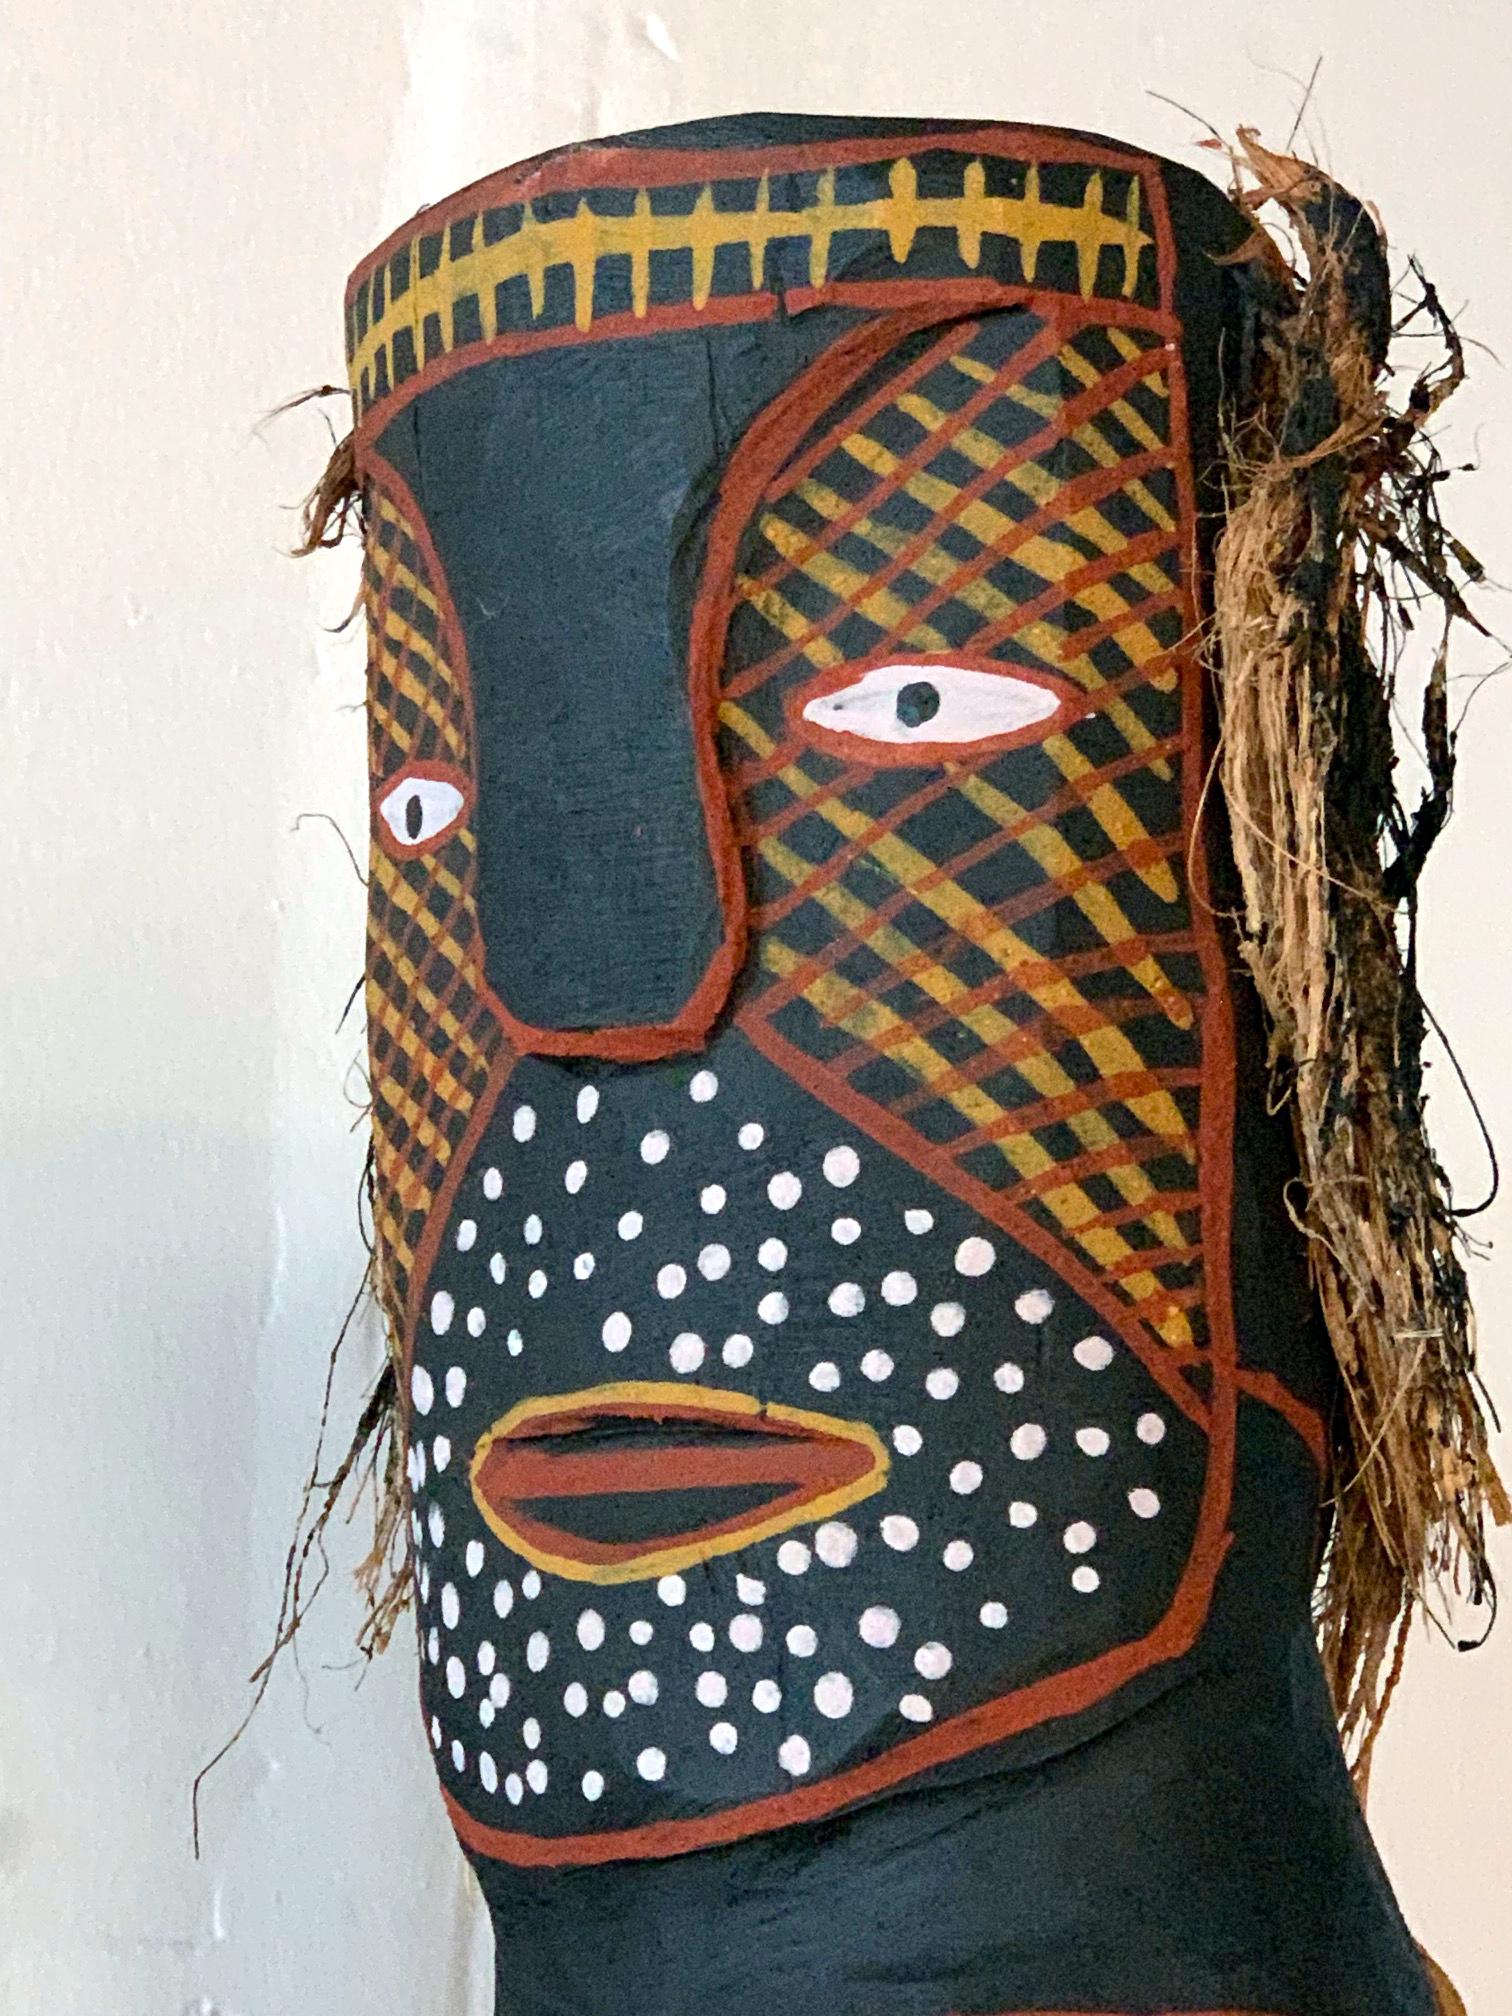 tiwi bird carvings for sale